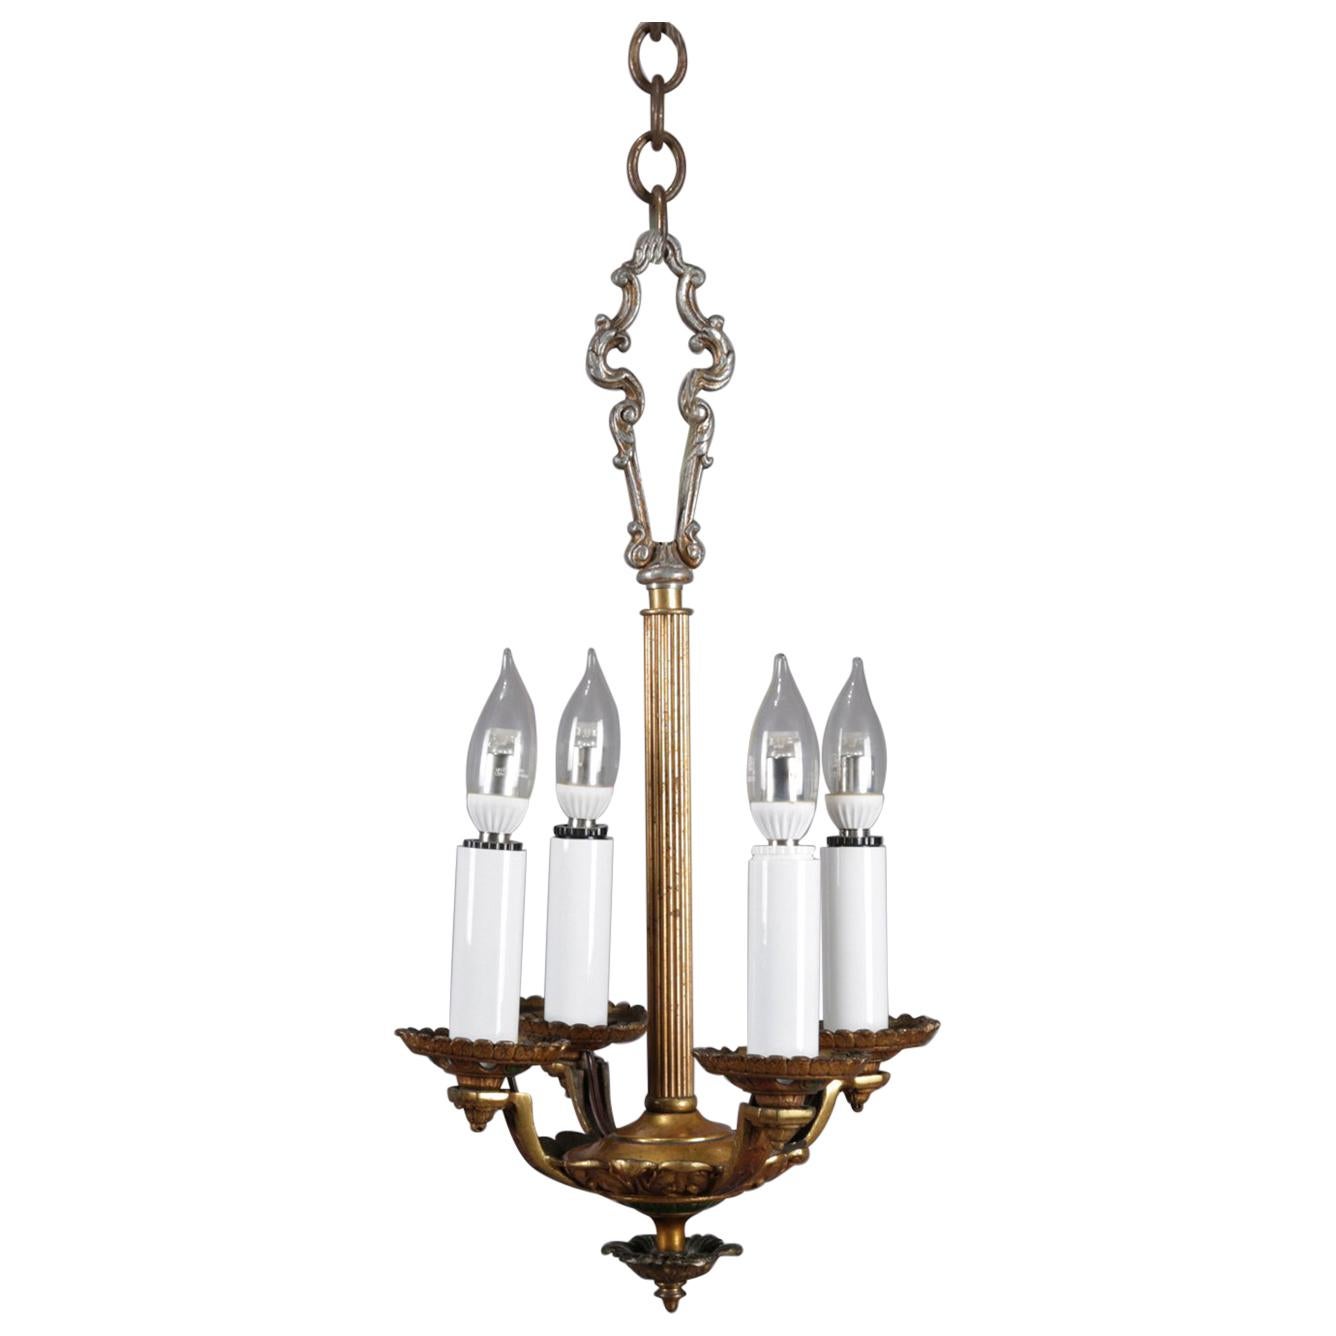 Petite French Gilt 4-Candle Light Hall Chandelier, 20th Century